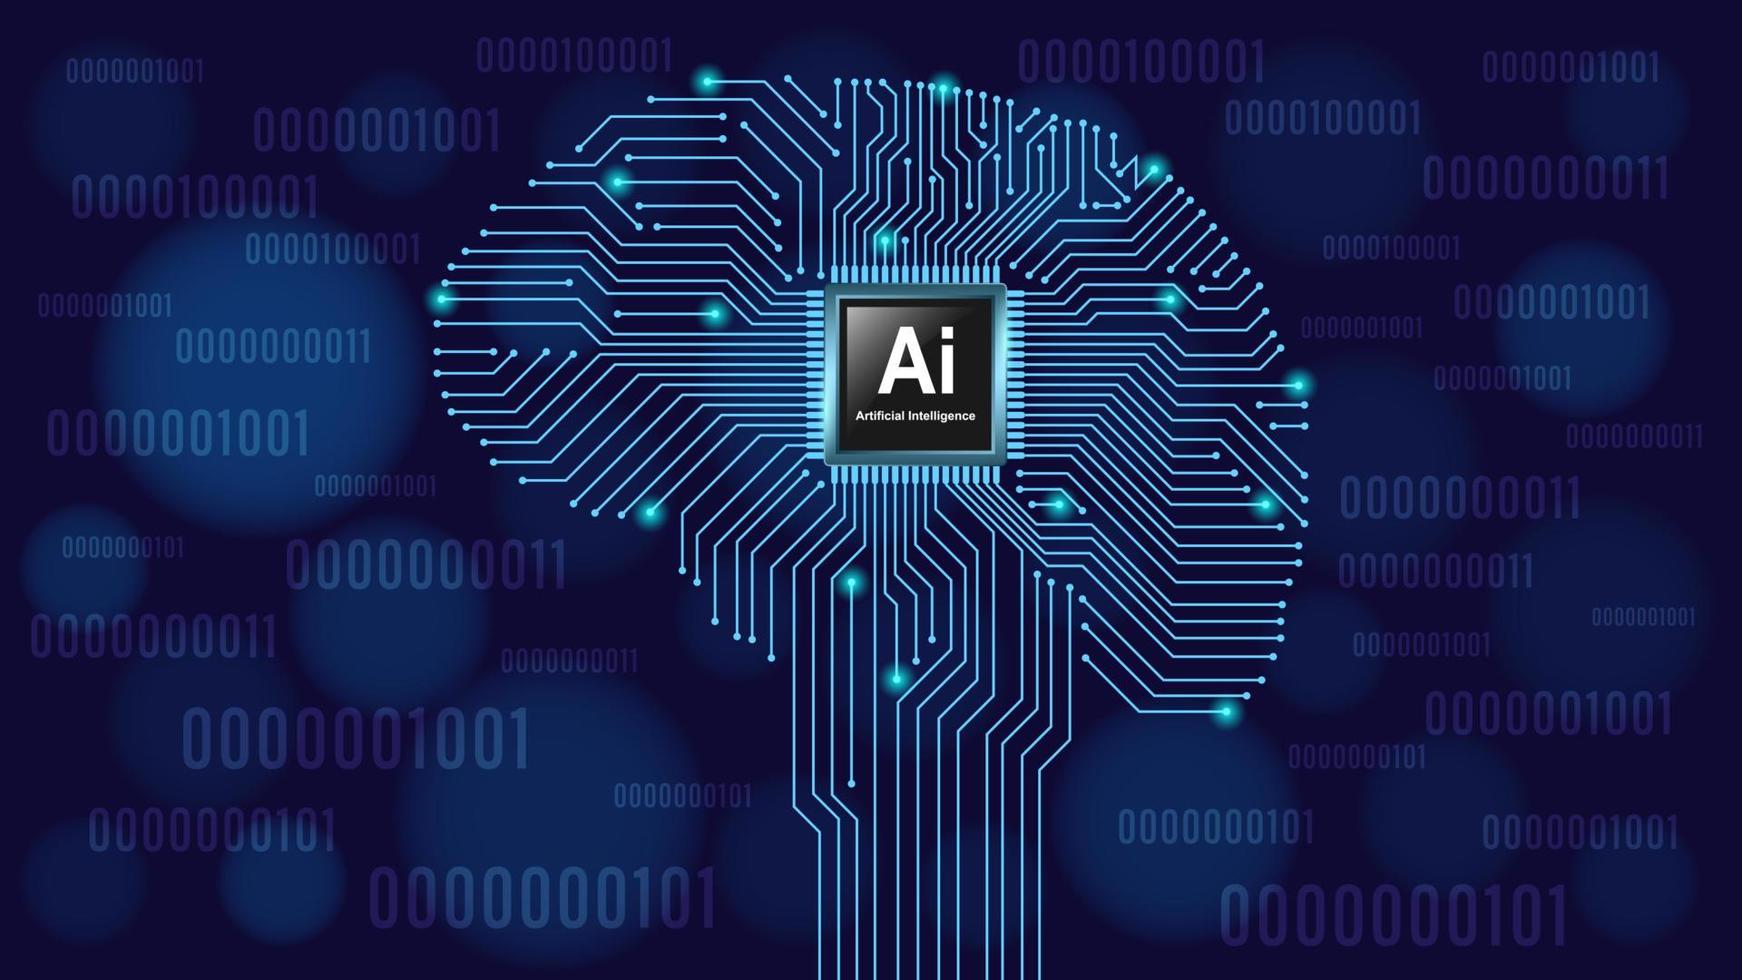 Ai chip in brain circuitry background vector